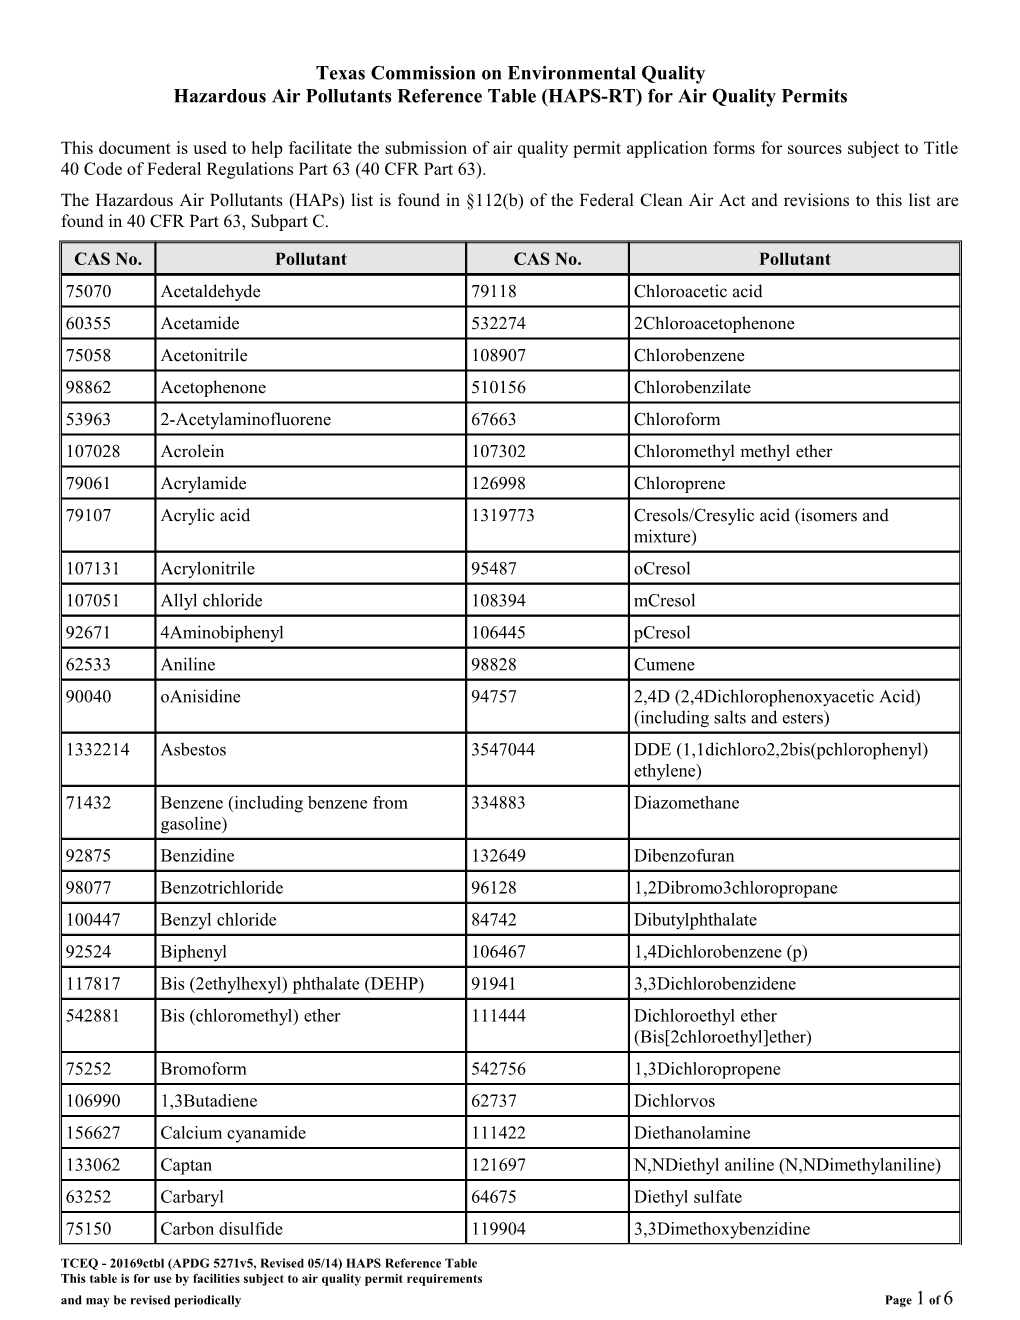 TCEQ Hazardous Air Pollutants Reference Table (HAPS-RT) for Air Quality Permits